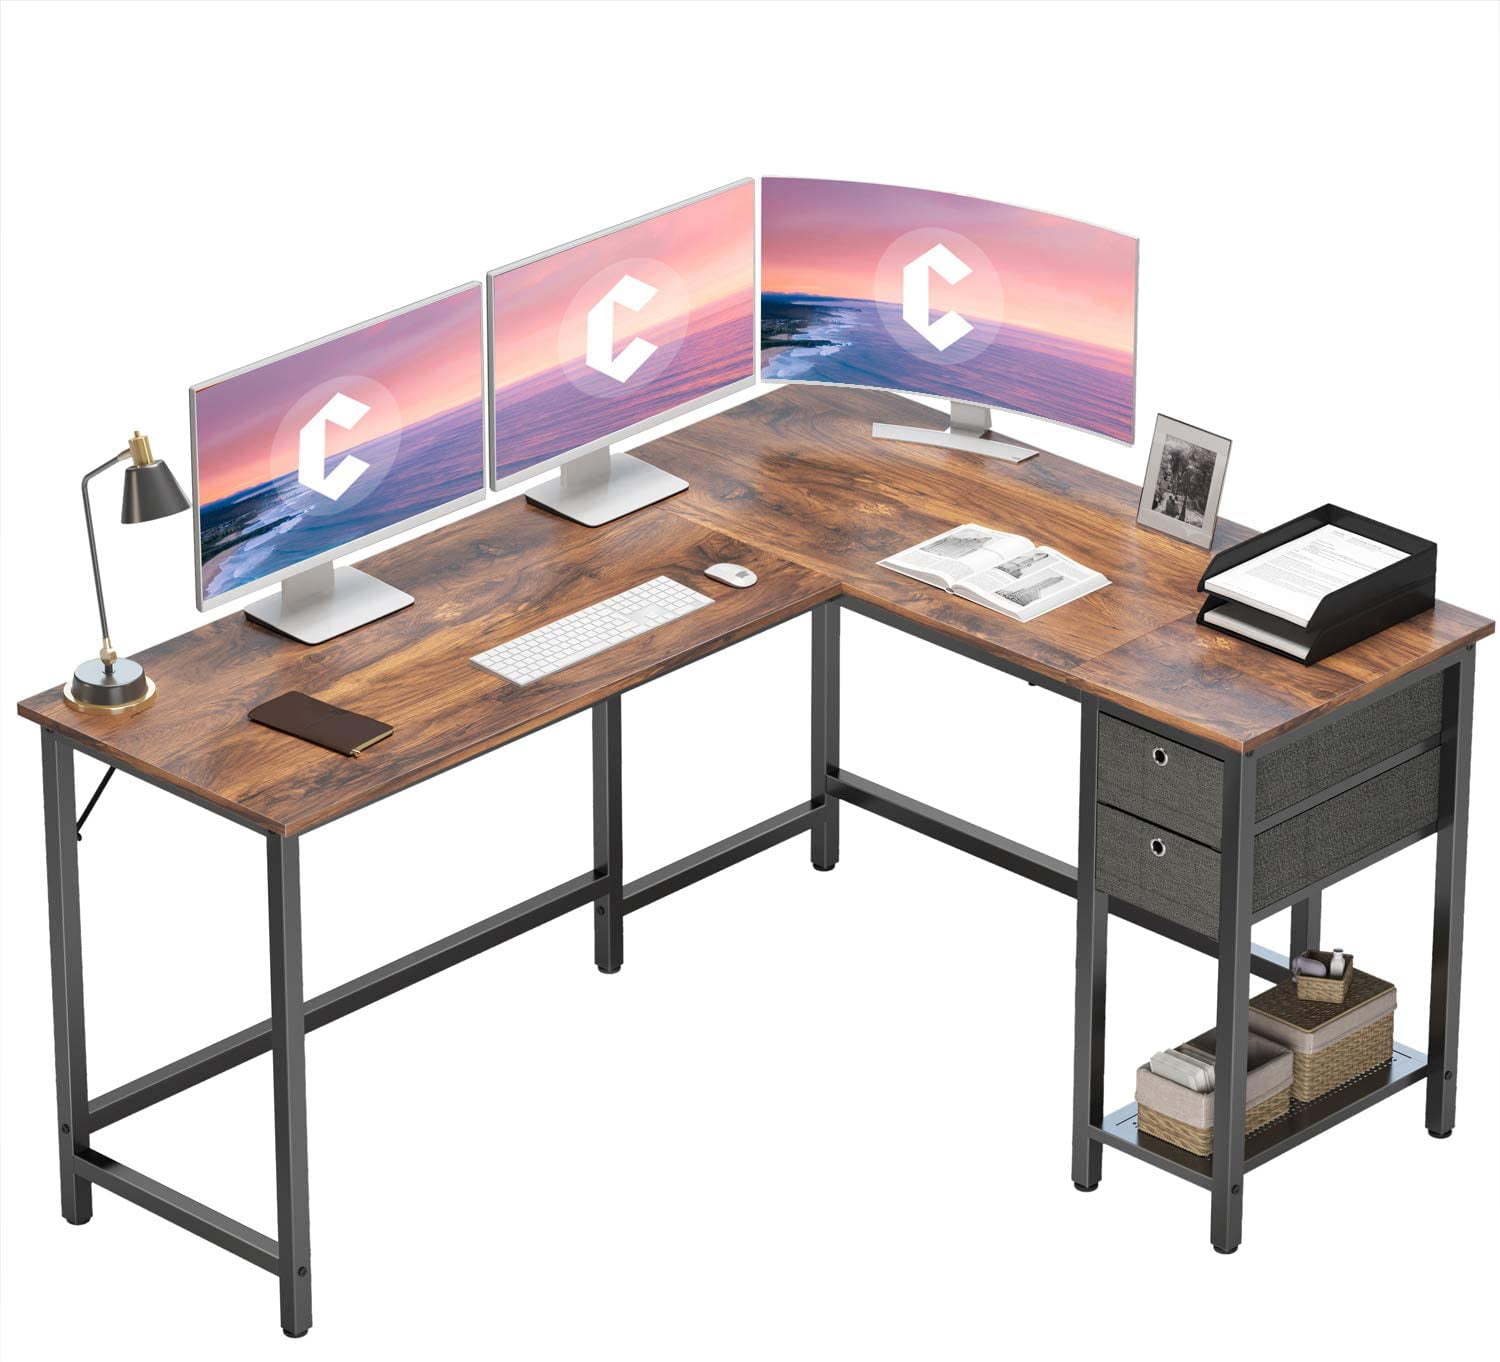 Home Office Writing Study Workstation with Small Table Space Saving CubiCubi Modern L-Shaped Desk Computer Corner Desk Rustic Brown Easy to Assemble 